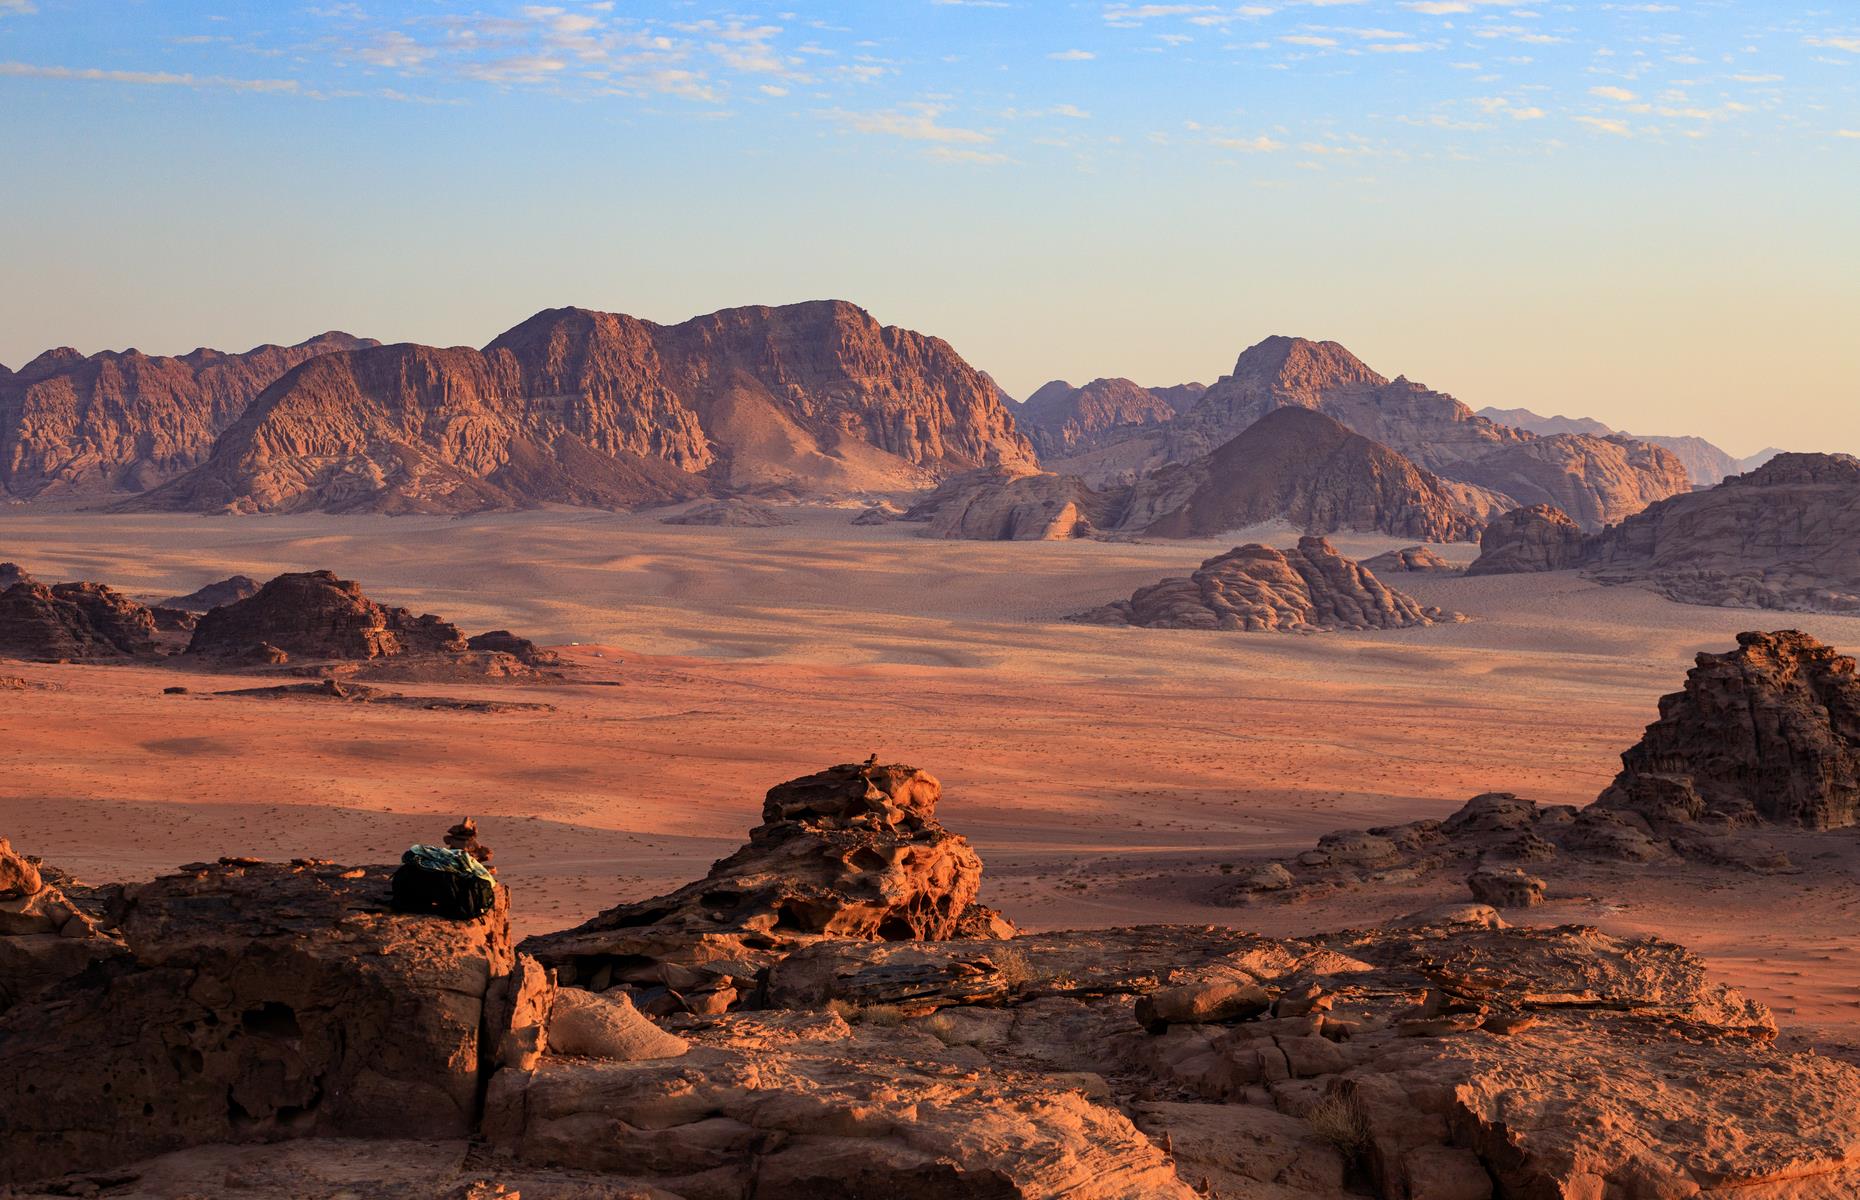 <p>The live-action remake of <em>Aladdin</em> from 2019, starring Mena Massoud and Will Smith, took the cast to the sweeping sand dunes, sandstone mountains and rocky caverns of Wadi Rum. In the south of Jordan on the western edge of the Arabian desert, this protected reserve is the perfect location for the retelling of the Middle Eastern folk tale.</p>